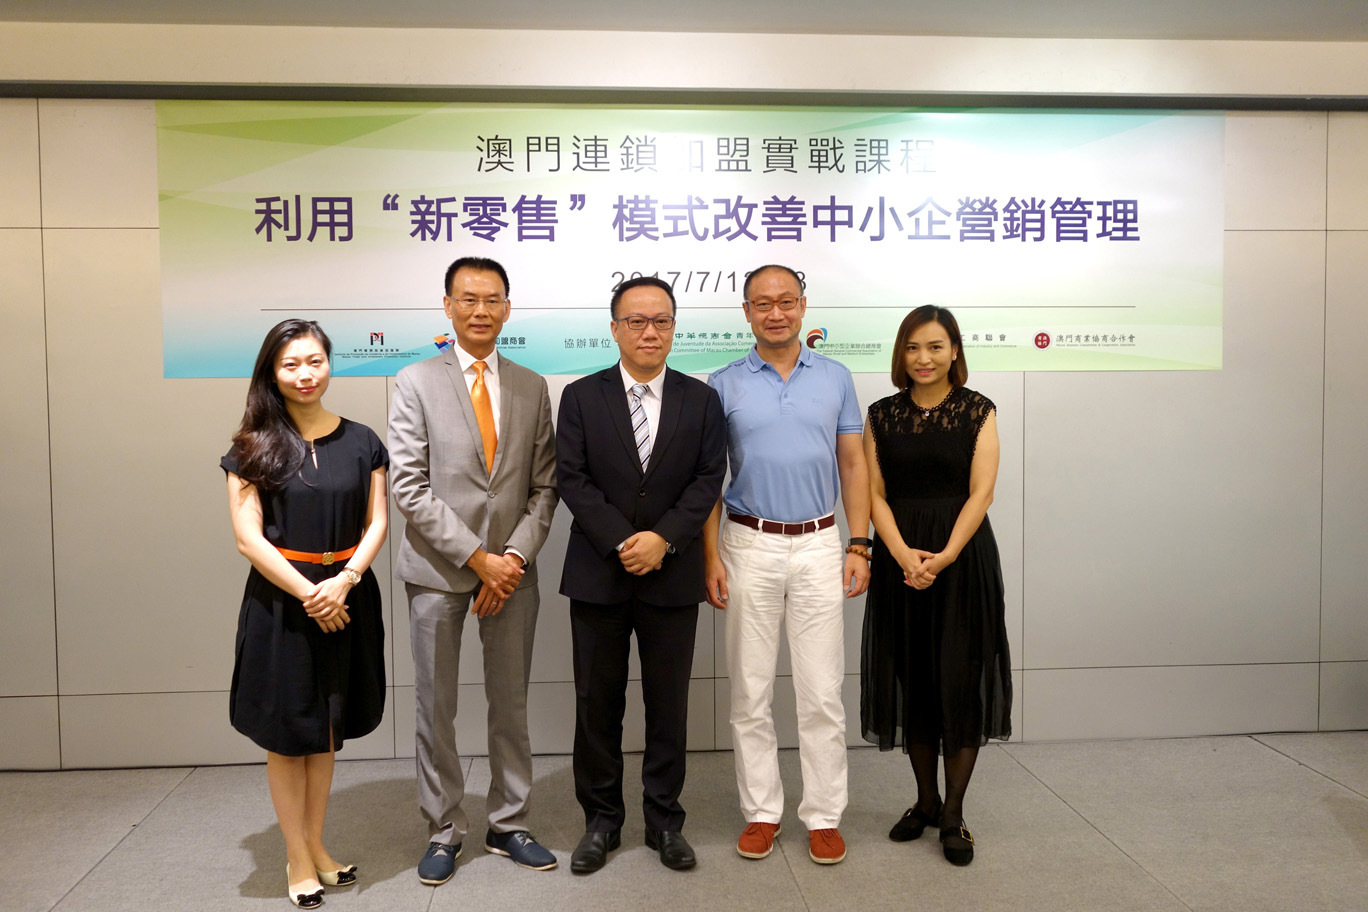 Training Course on Practical Issues for Macao Chain Stores and Franchise Businesses – Utilizing Emerging Retailing Models to Leverage Marketing and Management, co-organised by IPIM and the Macao Chain Stores and Franchise Association (12-13 July 2017)